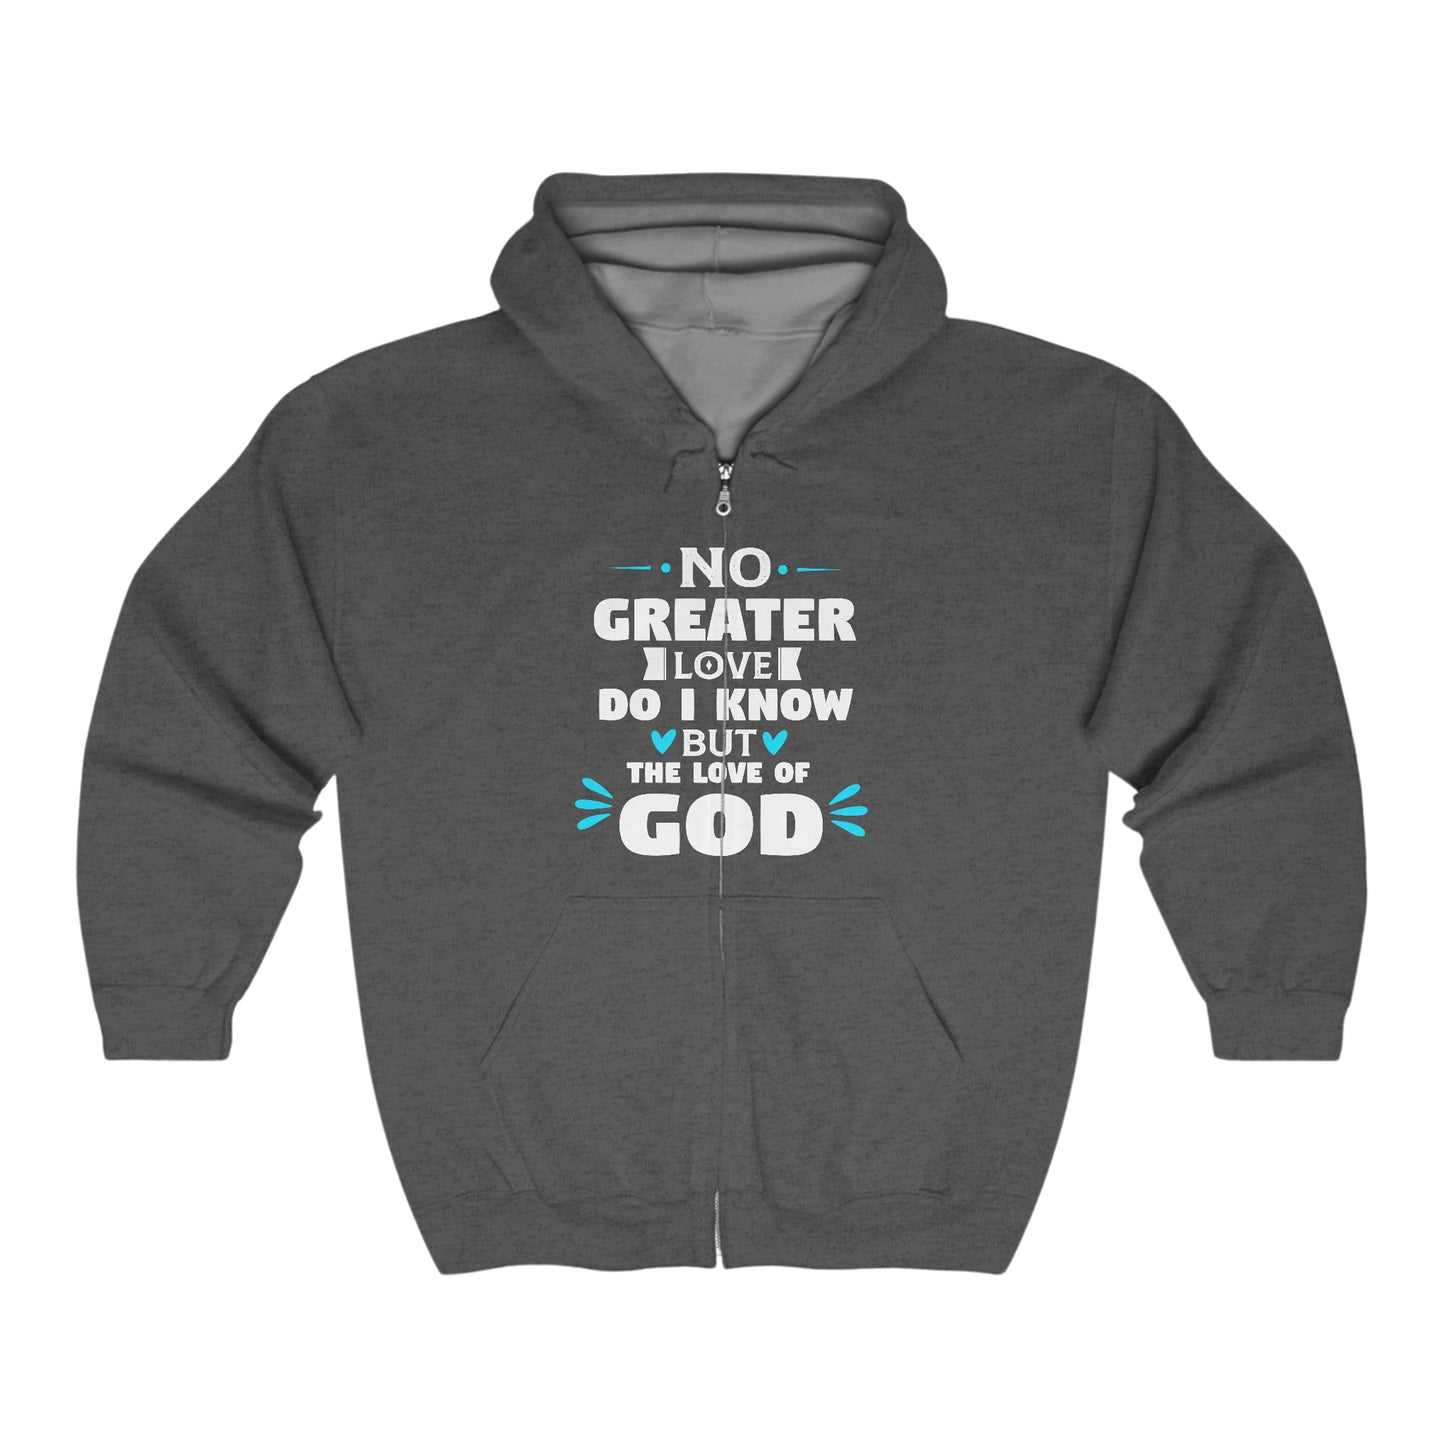 No Greater Love Do I Know But The Love Of God Unisex Heavy Blend Full Zip Hooded Sweatshirt